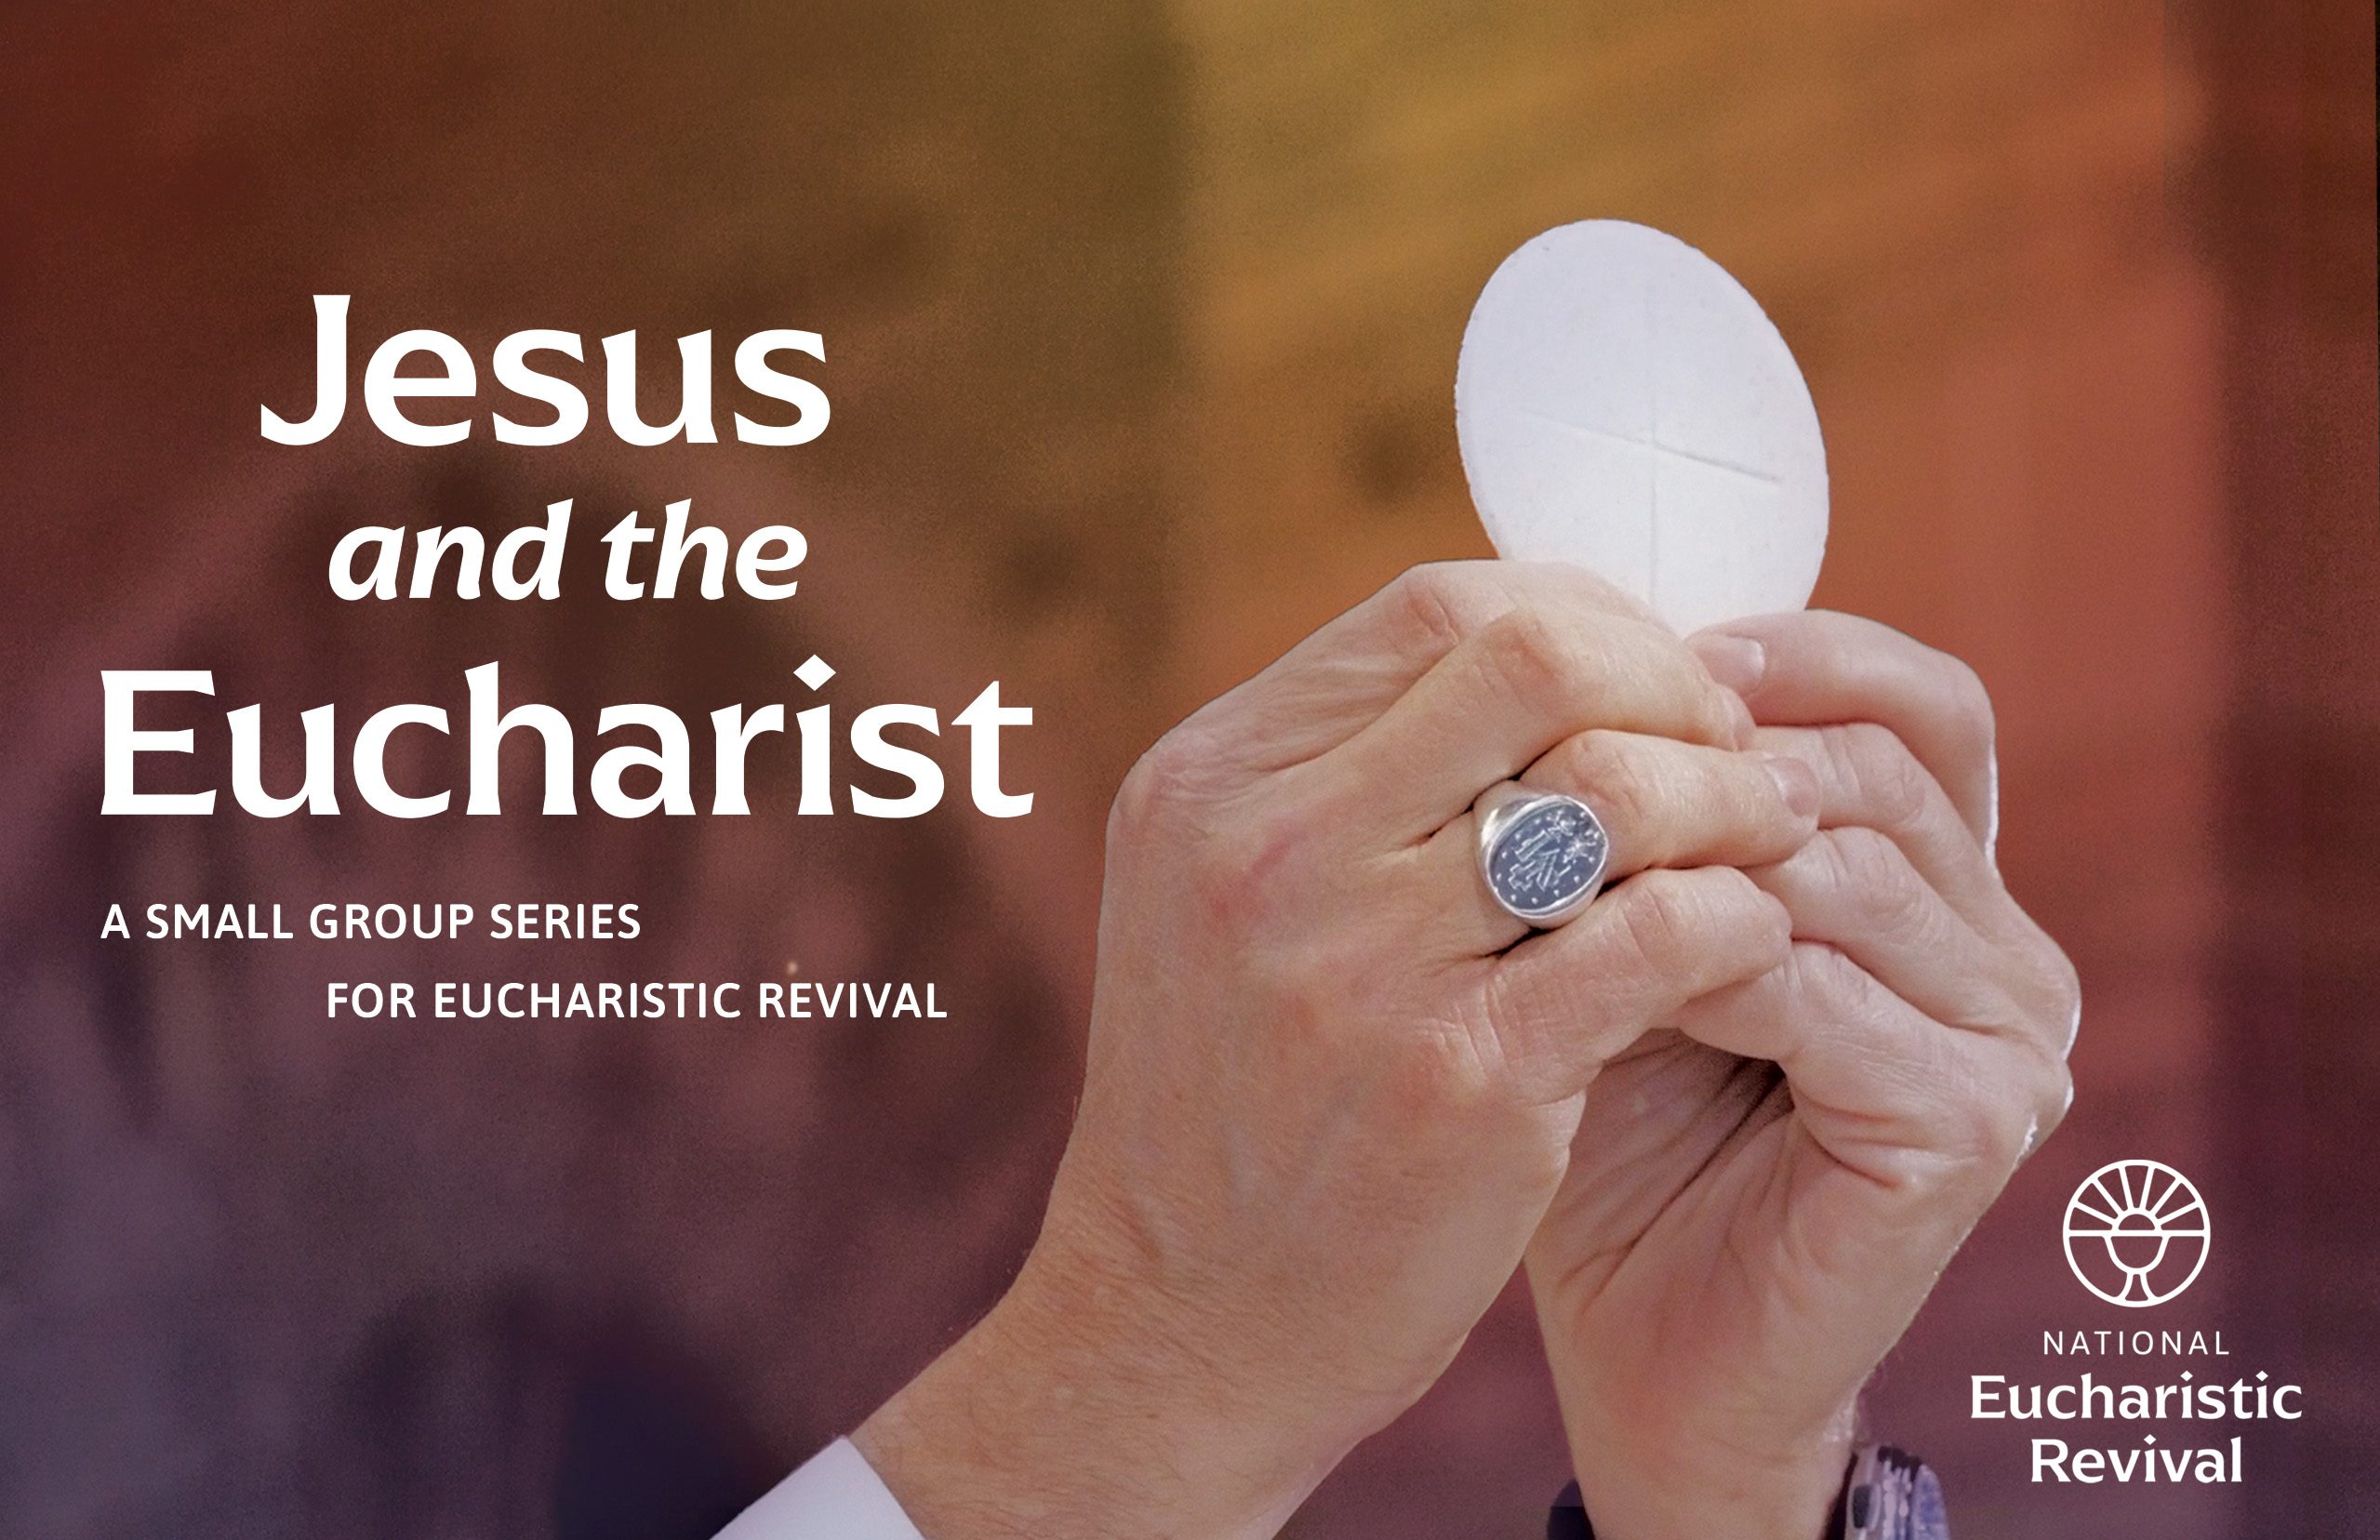 Jesus and the Eucharist, 7-part video series